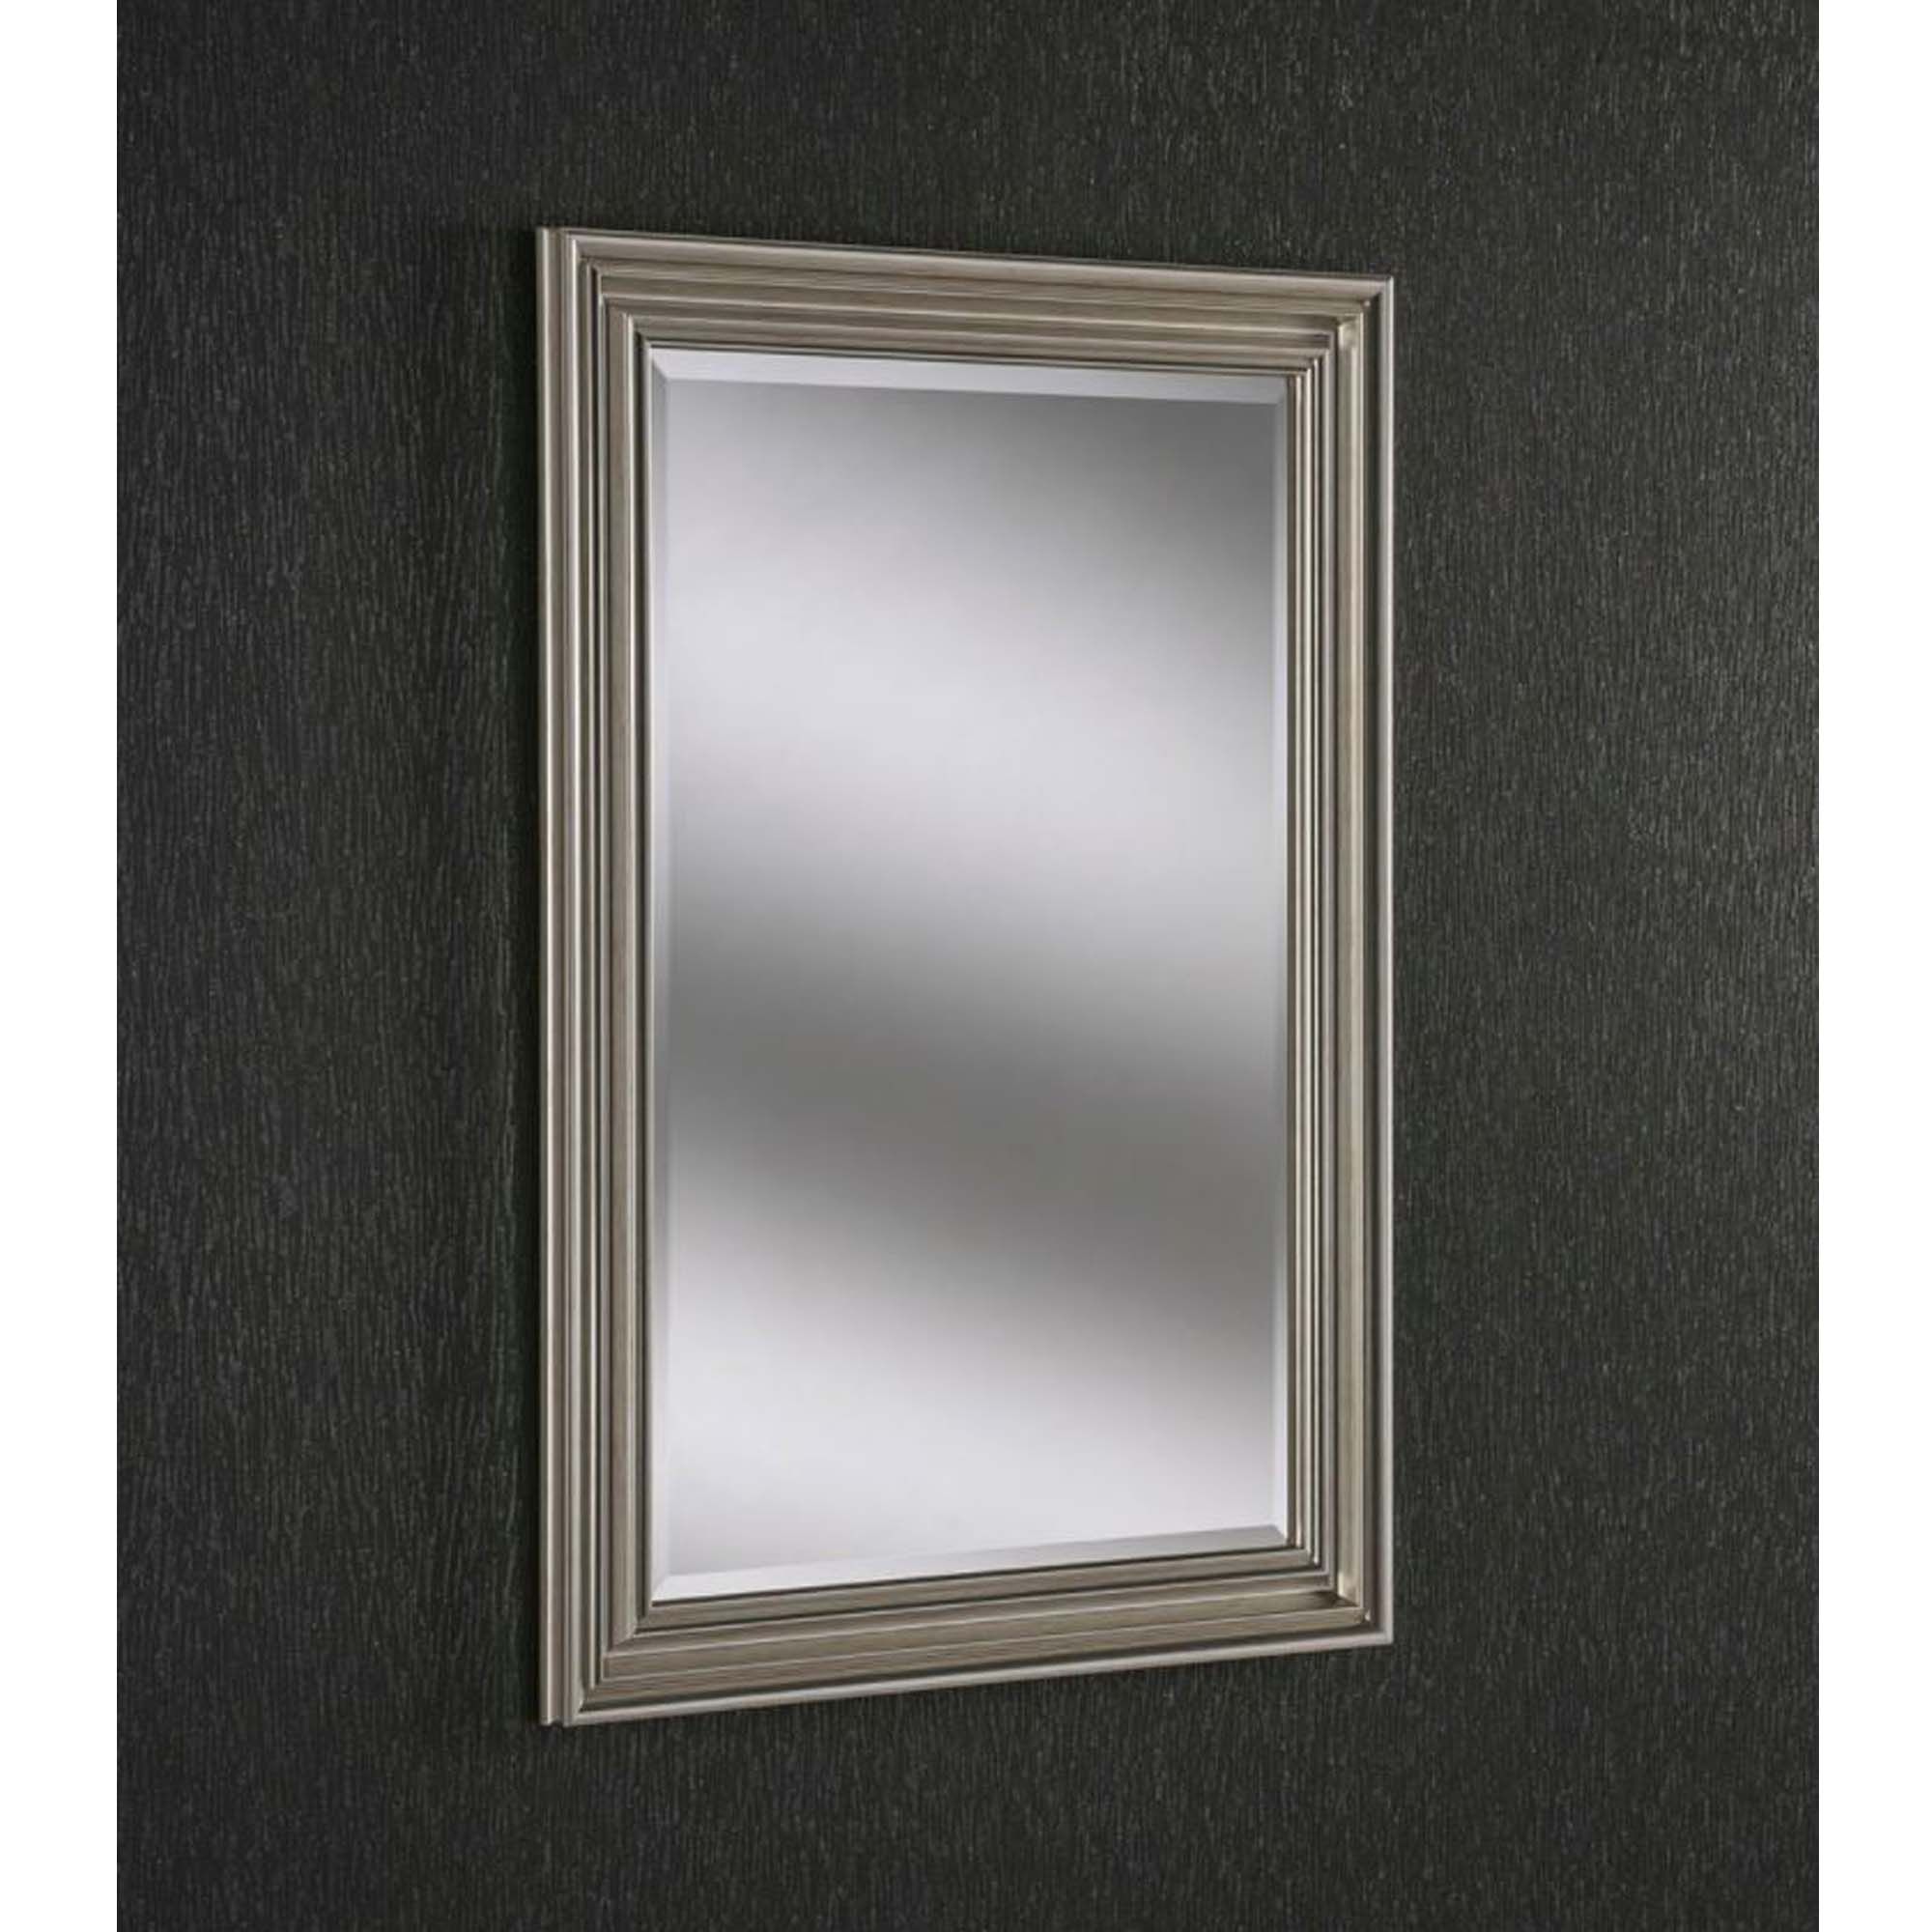 Multi Bevel Silver Wall Mirror | Decor | Homesdirect365 With Silver High Wall Mirrors (View 7 of 15)